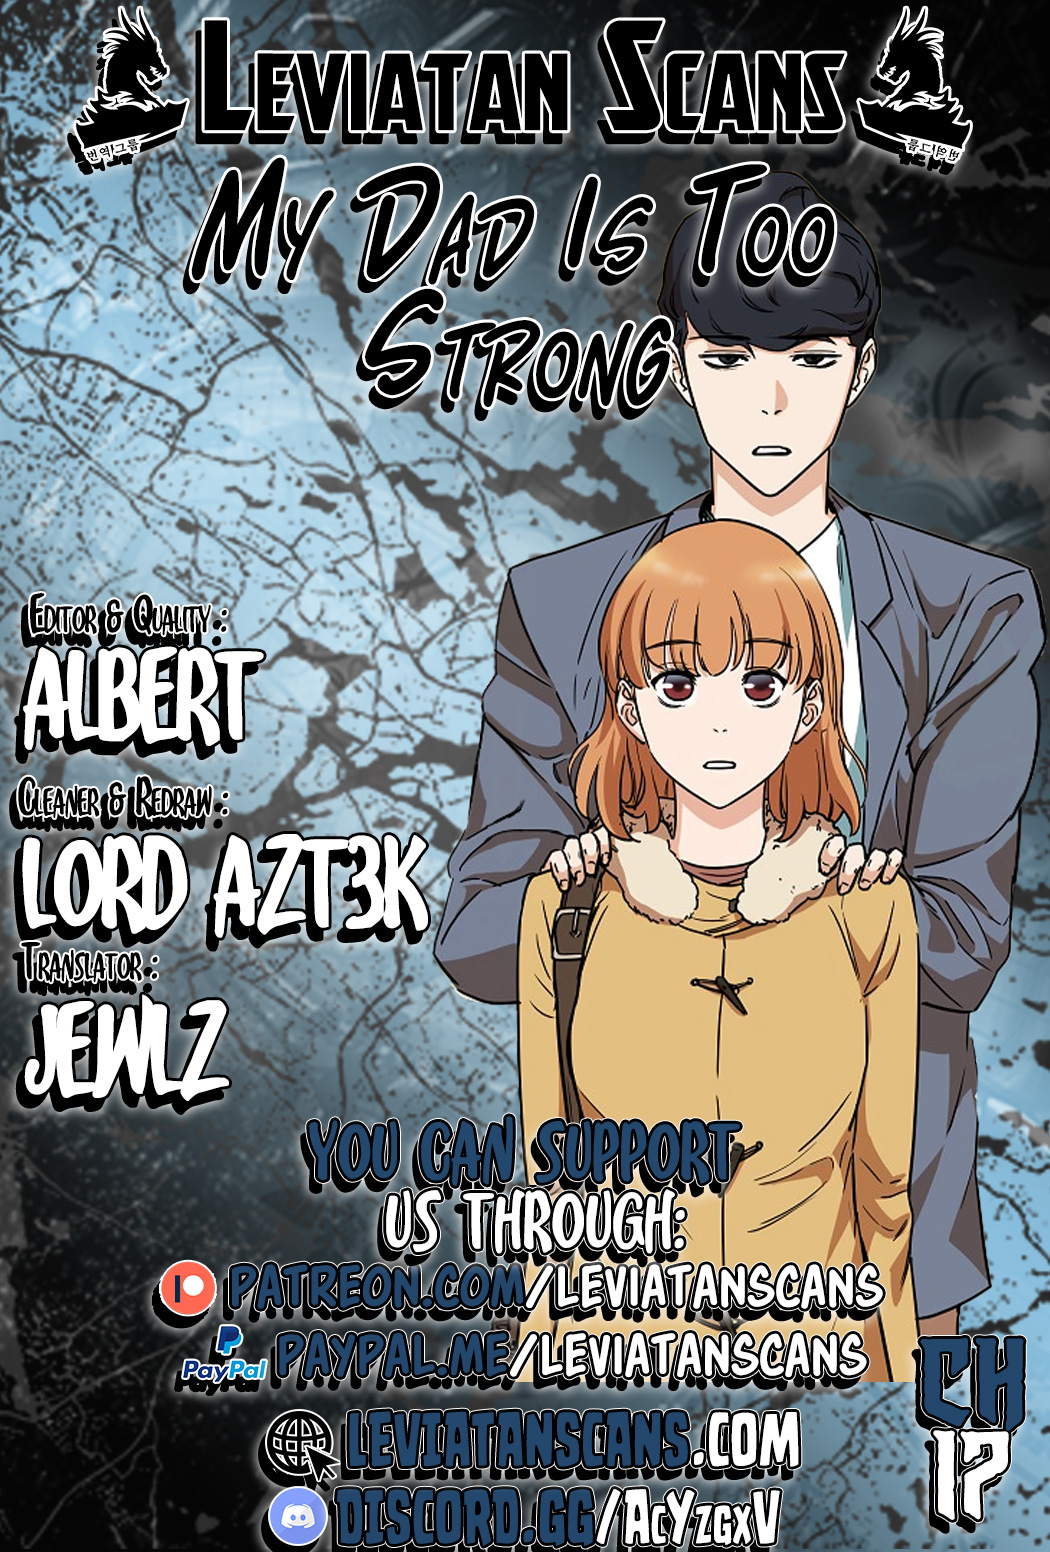 My Dad is Too Strong - Chapter 2596 - Image 1